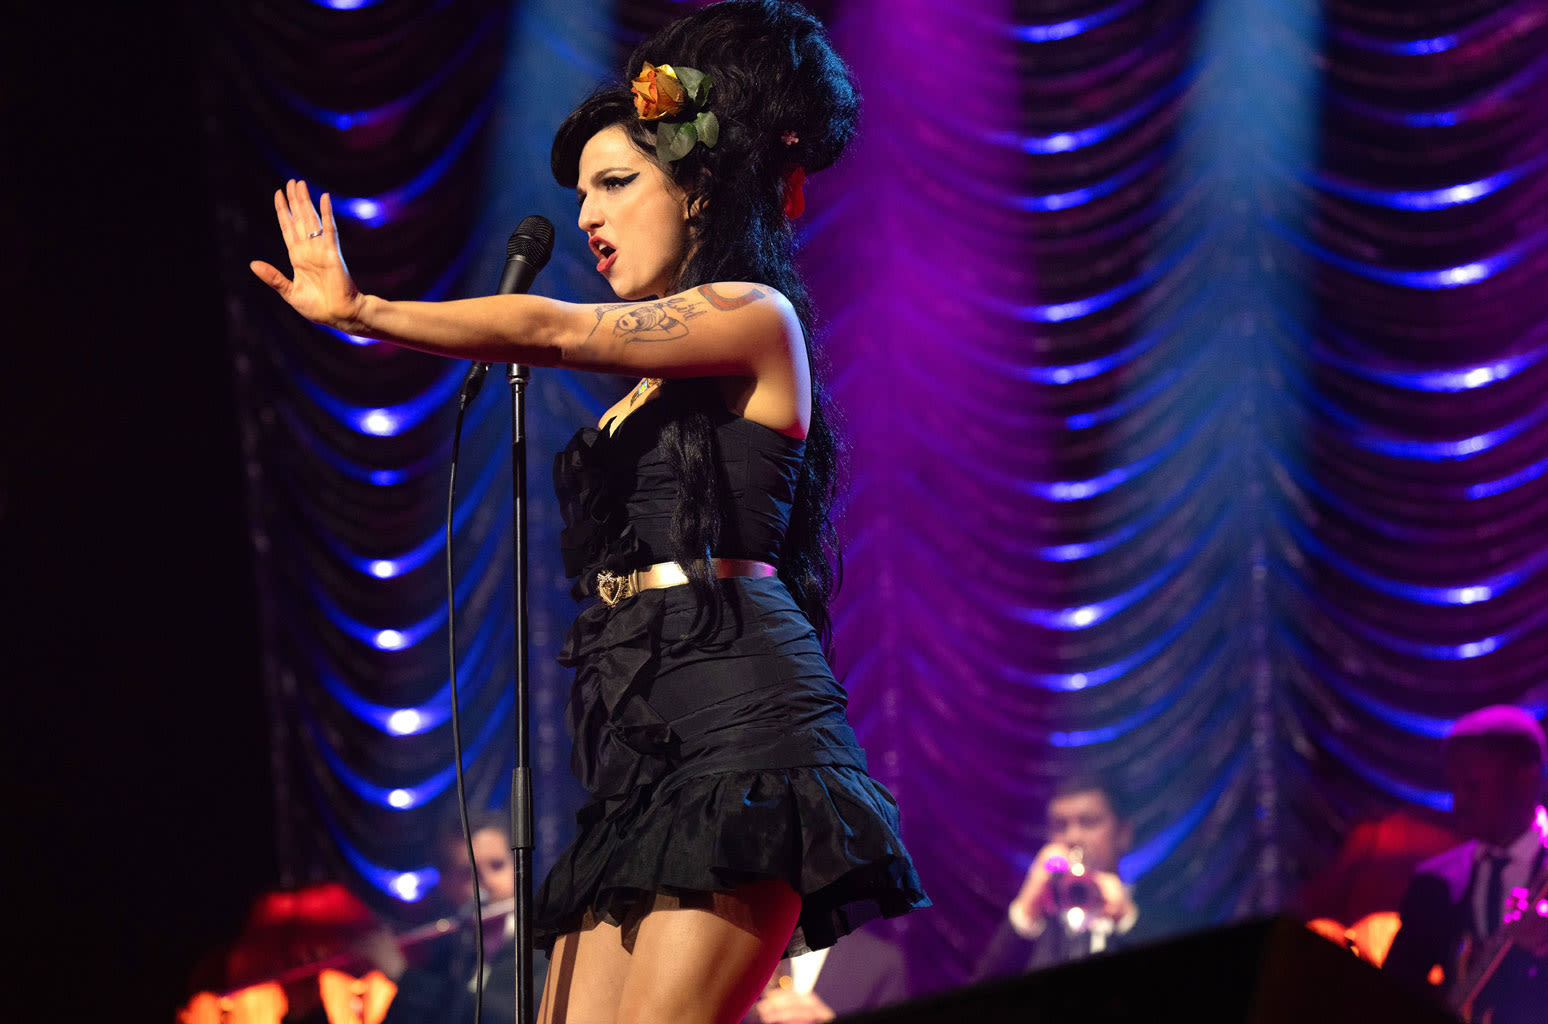 Amy Winehouse Biopic ‘Back to Black’ Has a Disappointing Opening Weekend